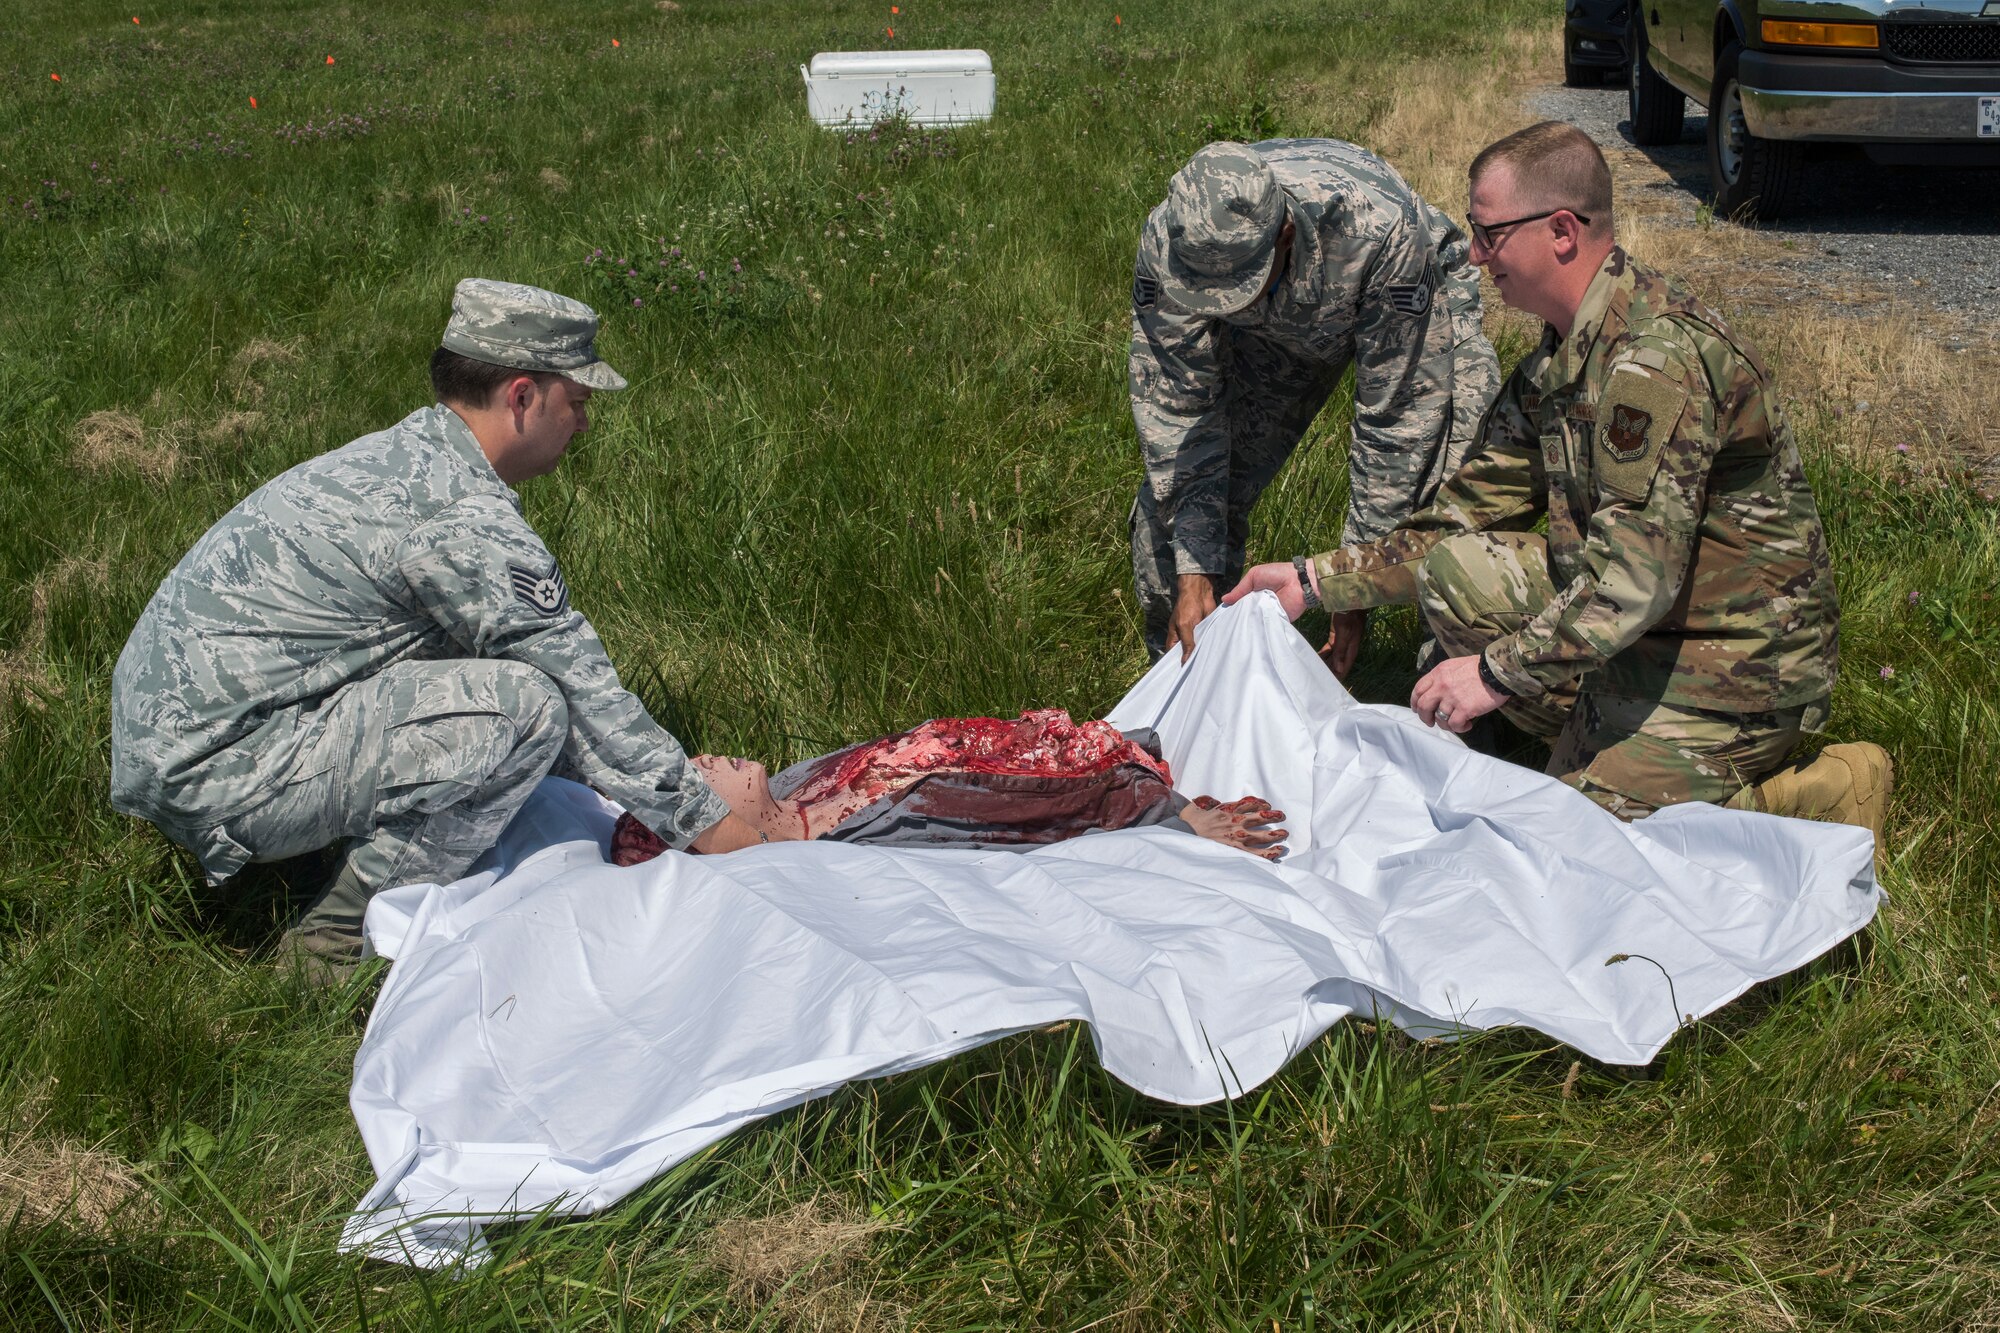 Air Force Mortuary Affairs Operations and 436th Force Support Squadron members wrap a training dummy during a search-and-recovery exercise June 28, 2019, at Dover Air Force Base, Del. The three members demonstrated how to properly tag and preserve remains during an aircraft mishap. (U.S. Air Force photo by Senior Airman Christopher Quail)